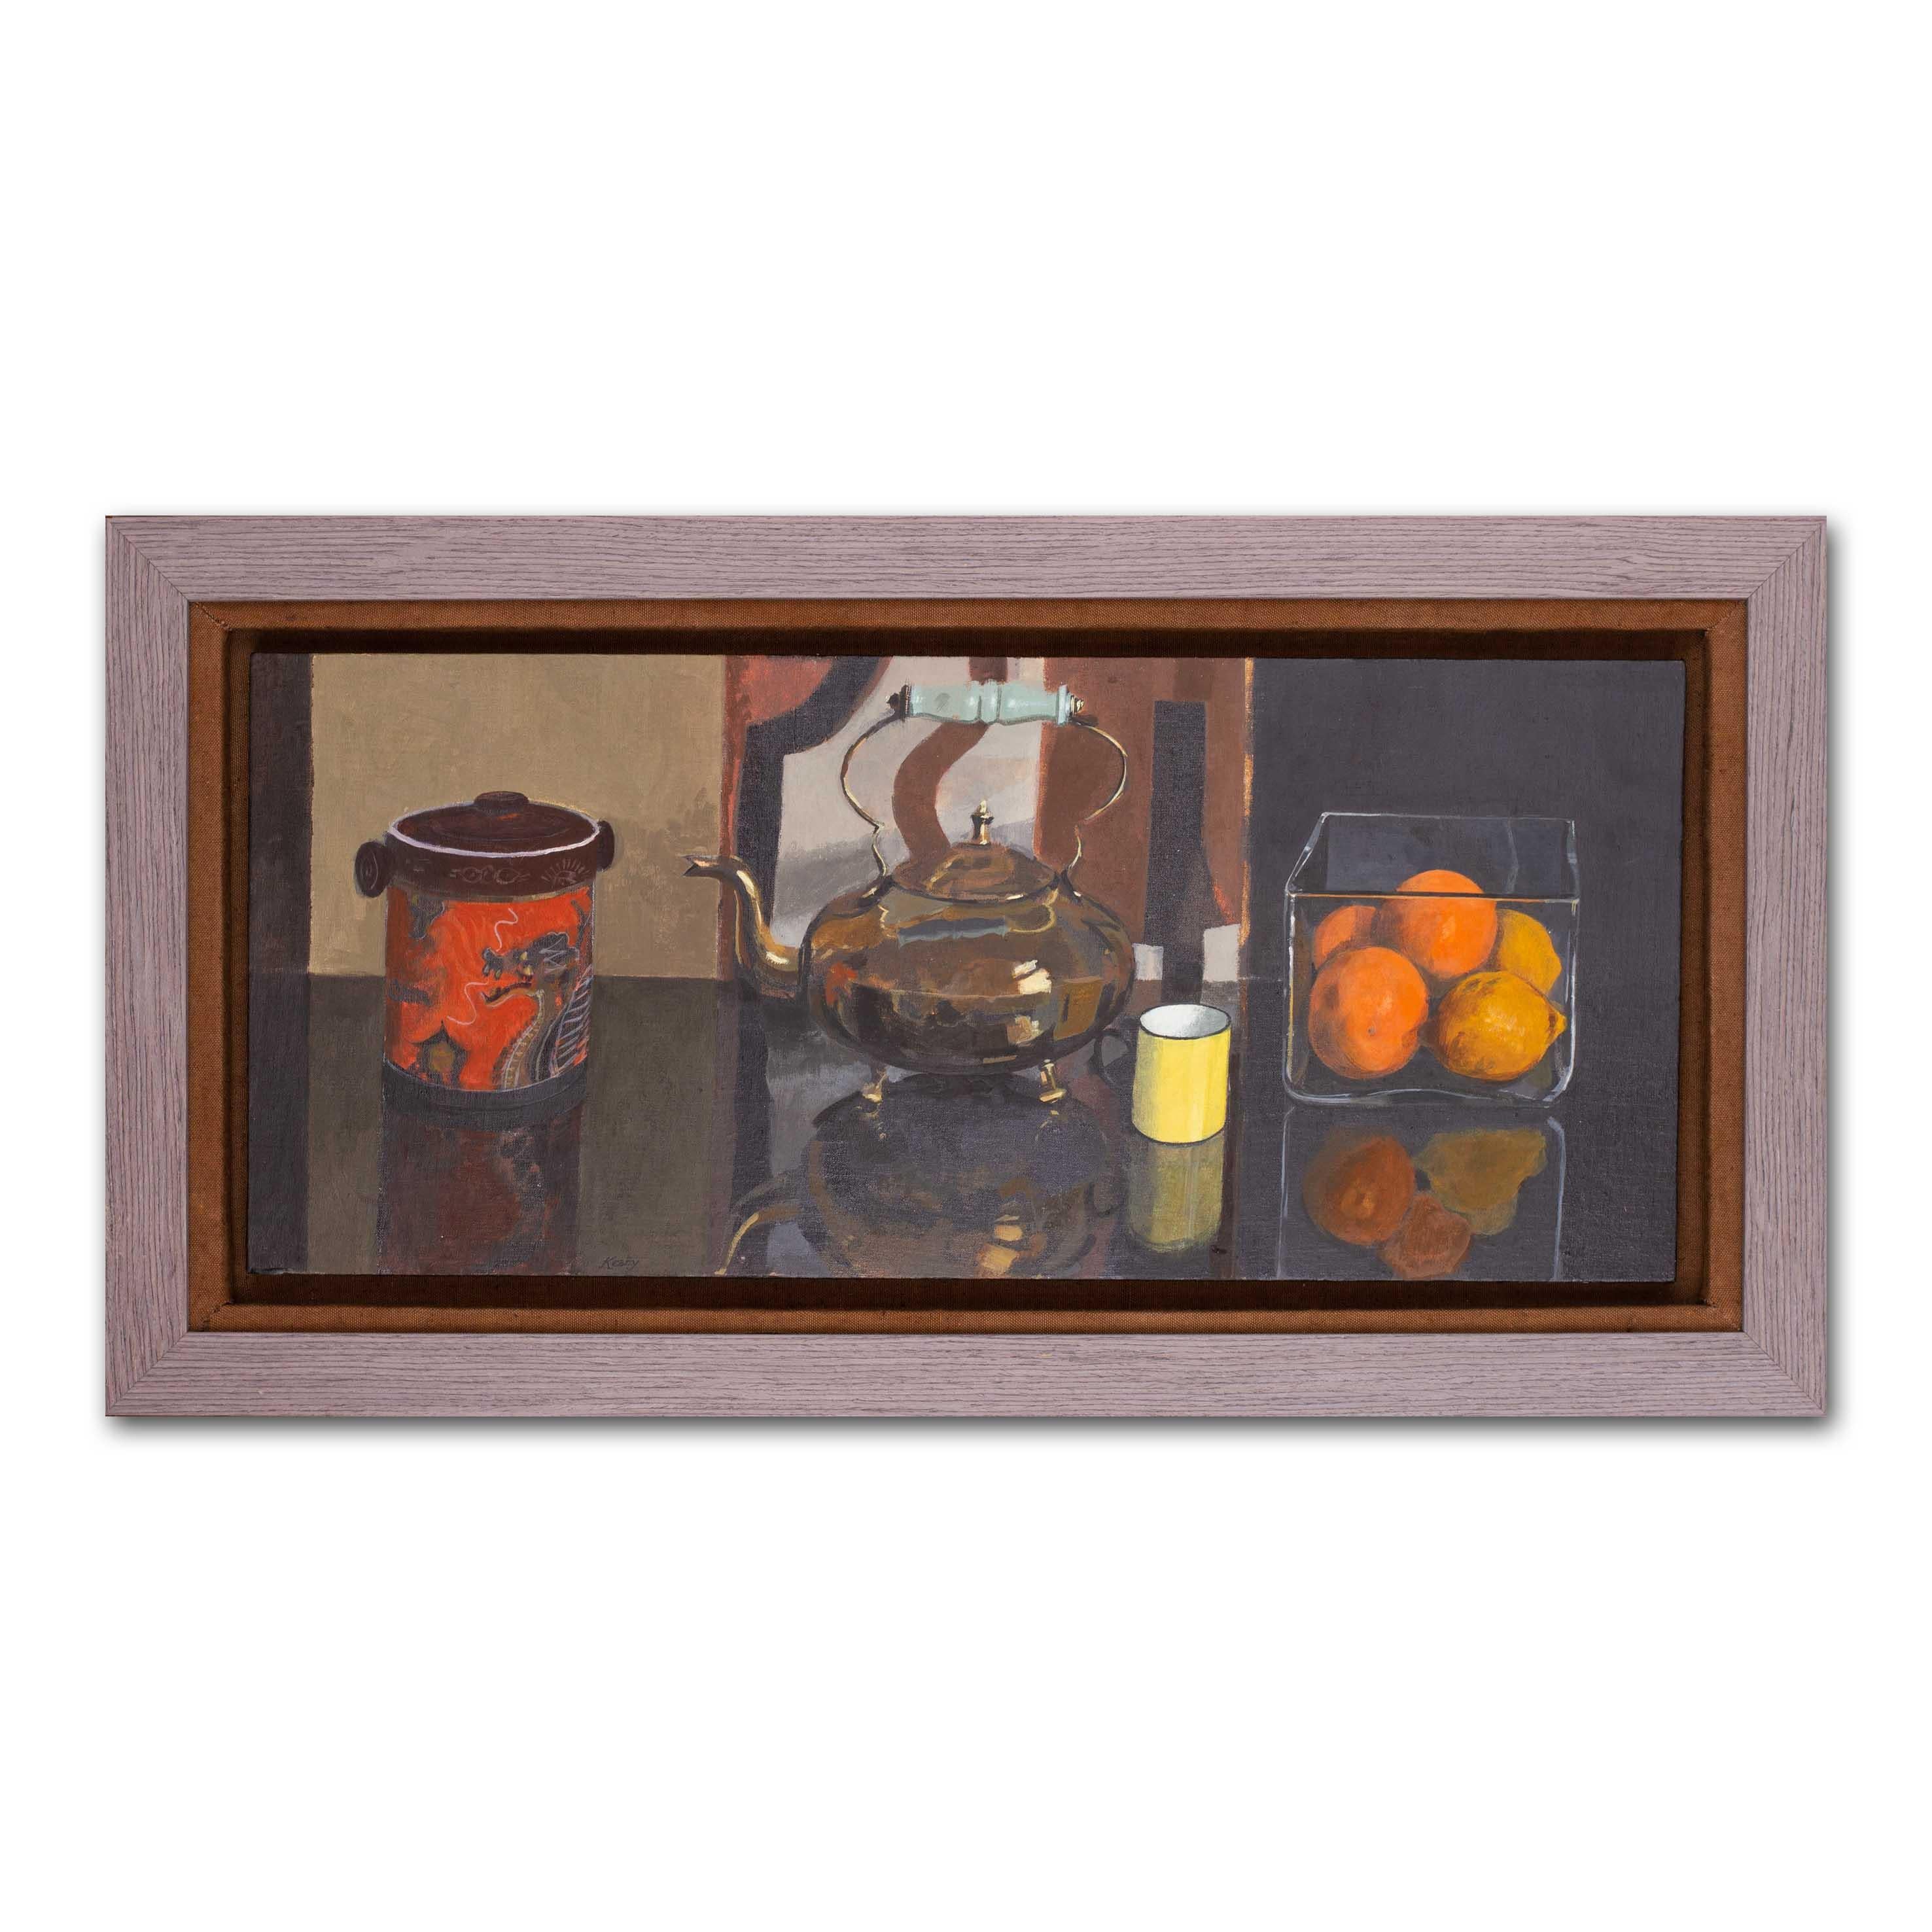 Brian Keany RSW (Scottish b.1939)
Still life on a glass table
Acrylic on canvas laid down on panel
Signed ‘Keany’ (lower left)
12 x 27.1/2 in. (30.5 x 70 cm.)
